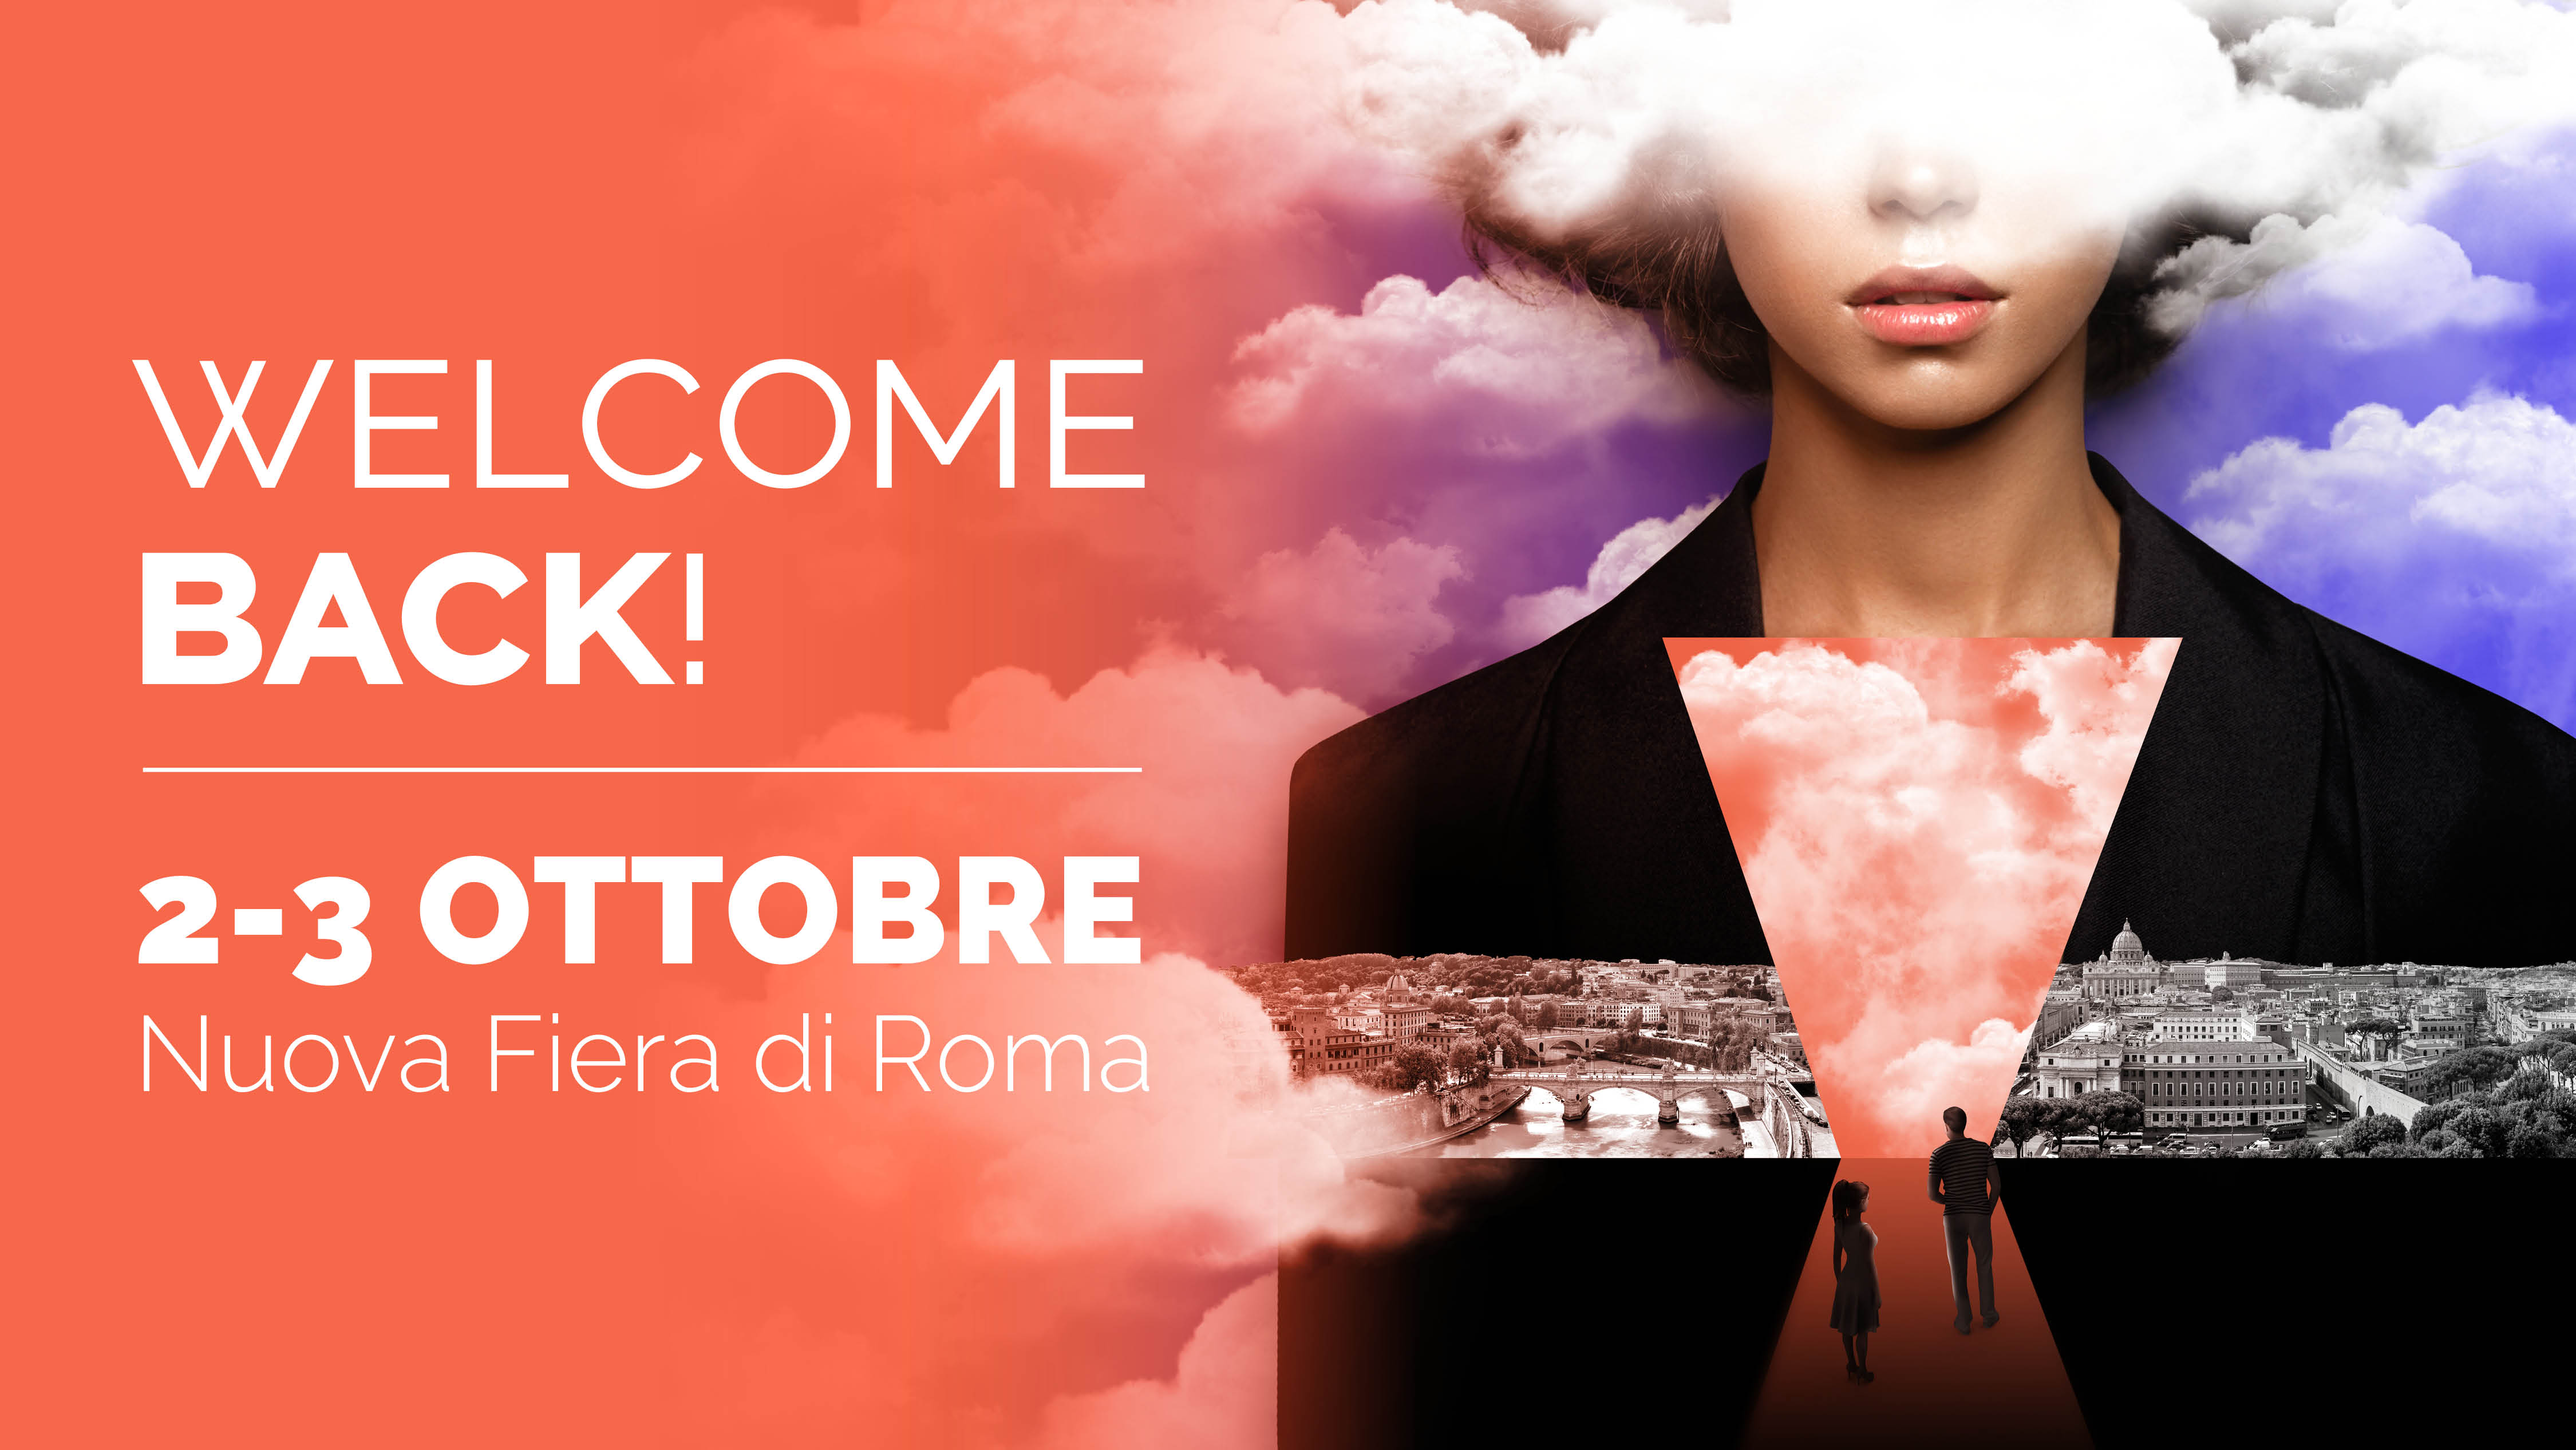 Welcome back. It’s time to meet in Rome